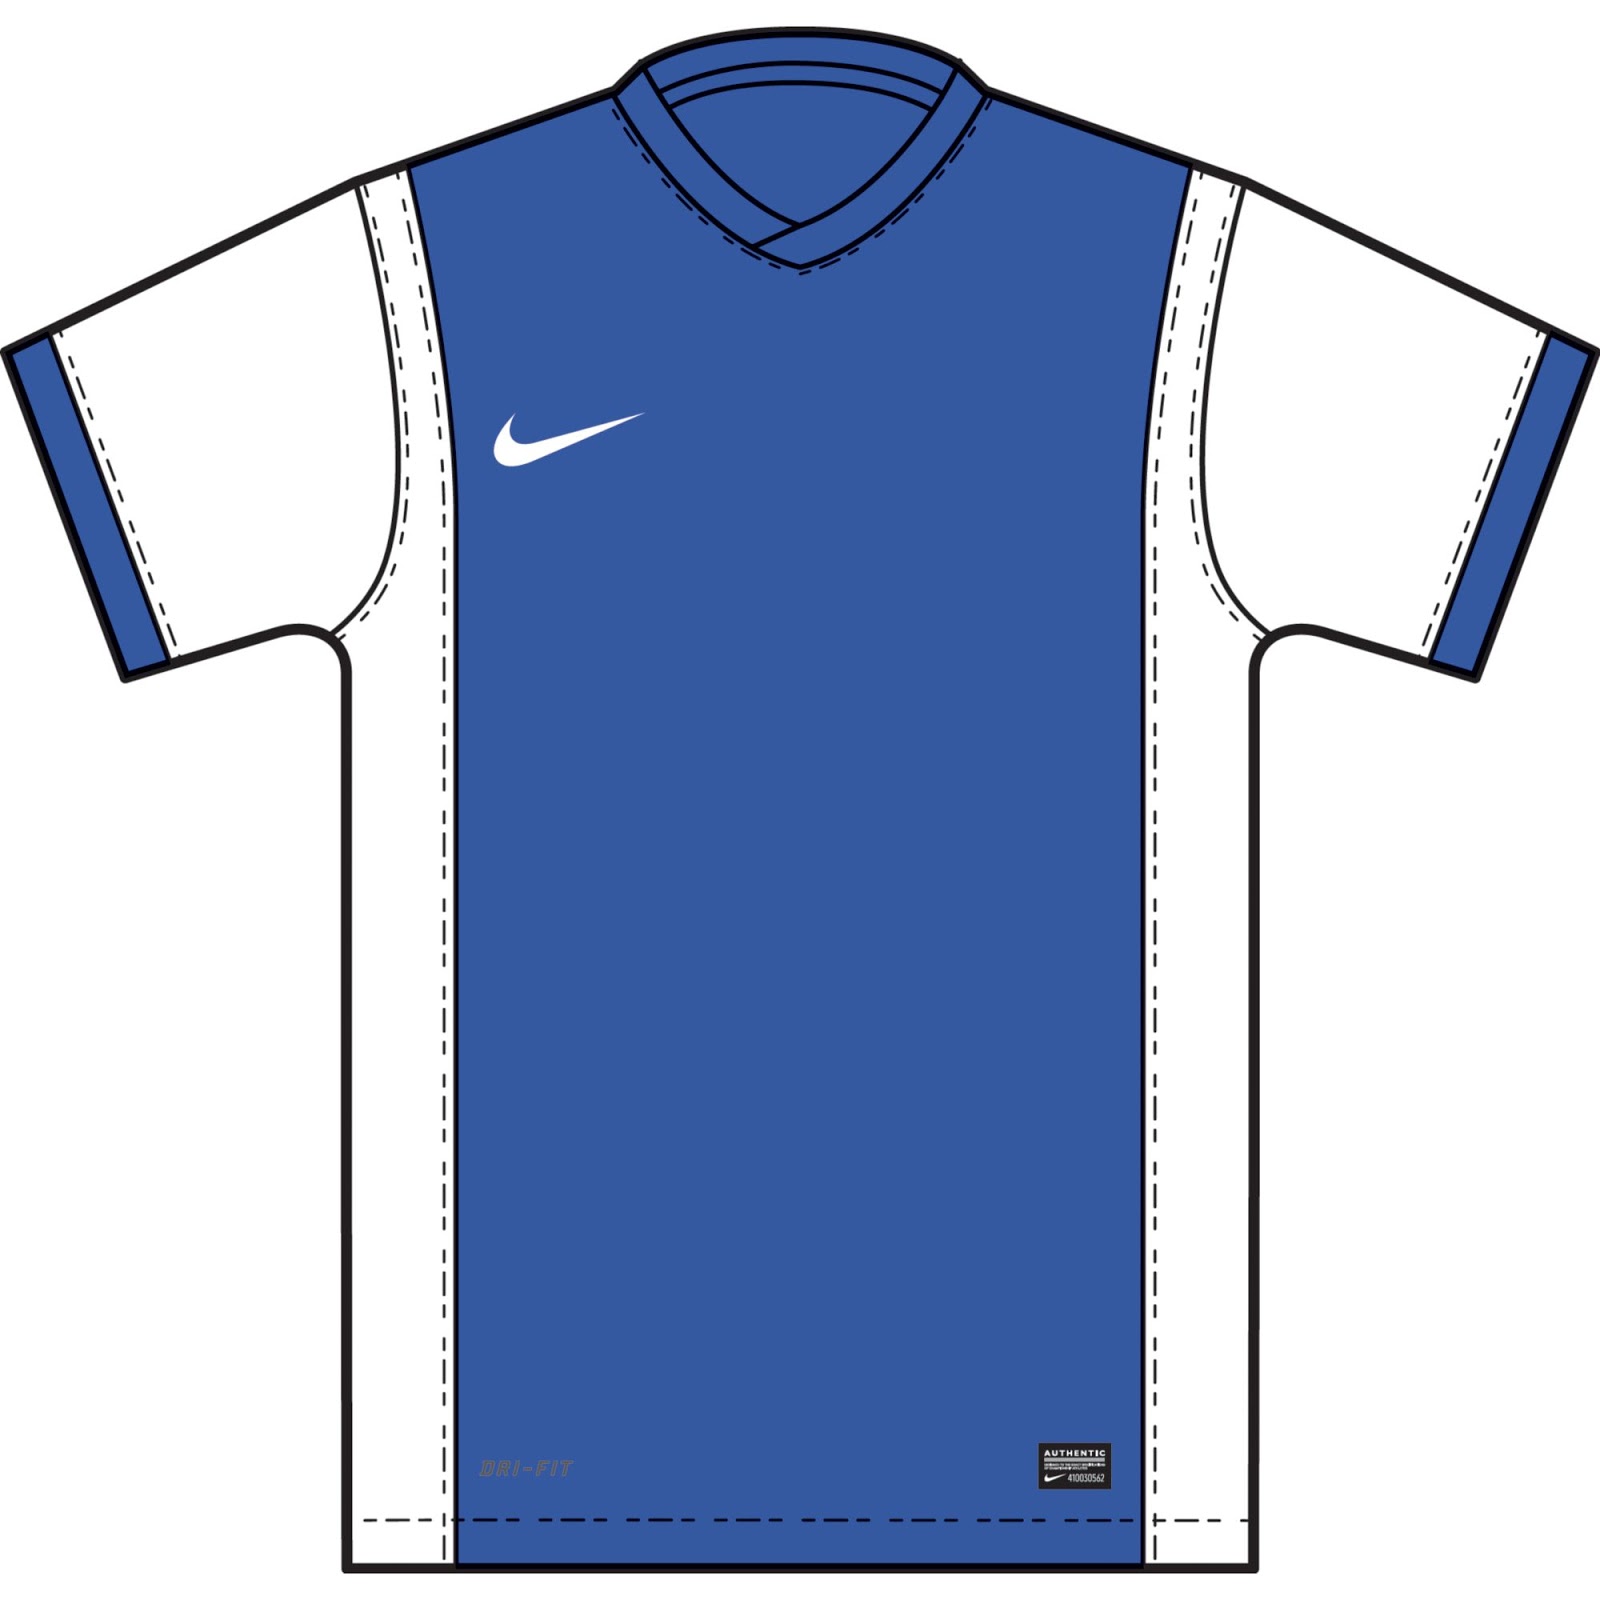 Download Soccer Jersey Clipart at GetDrawings.com | Free for personal use Soccer Jersey Clipart of your ...